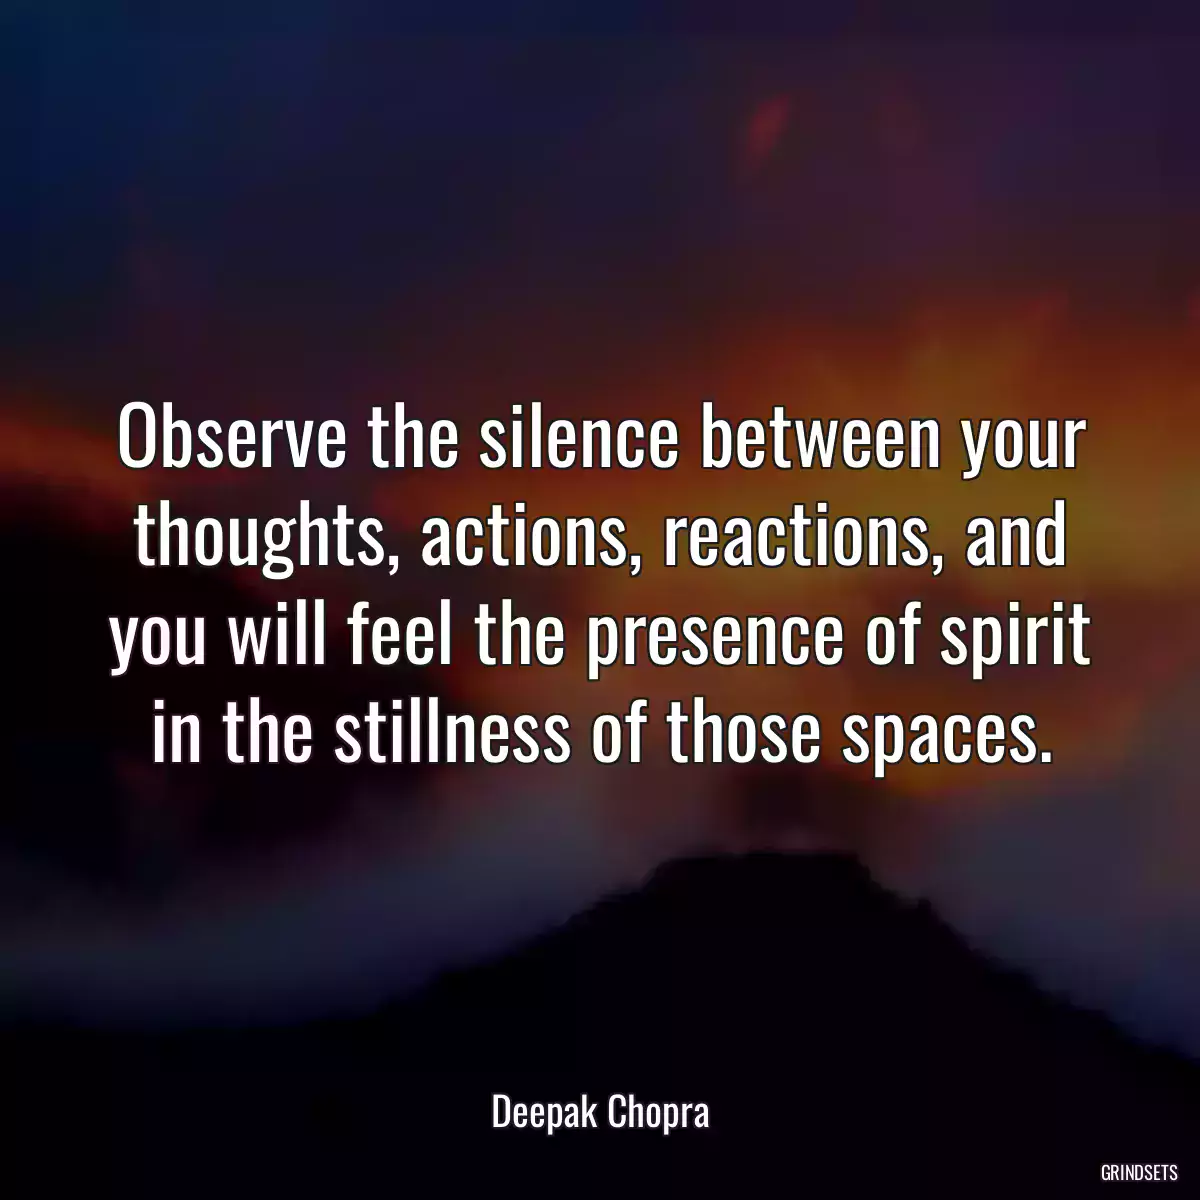 Observe the silence between your thoughts, actions, reactions, and you will feel the presence of spirit in the stillness of those spaces.